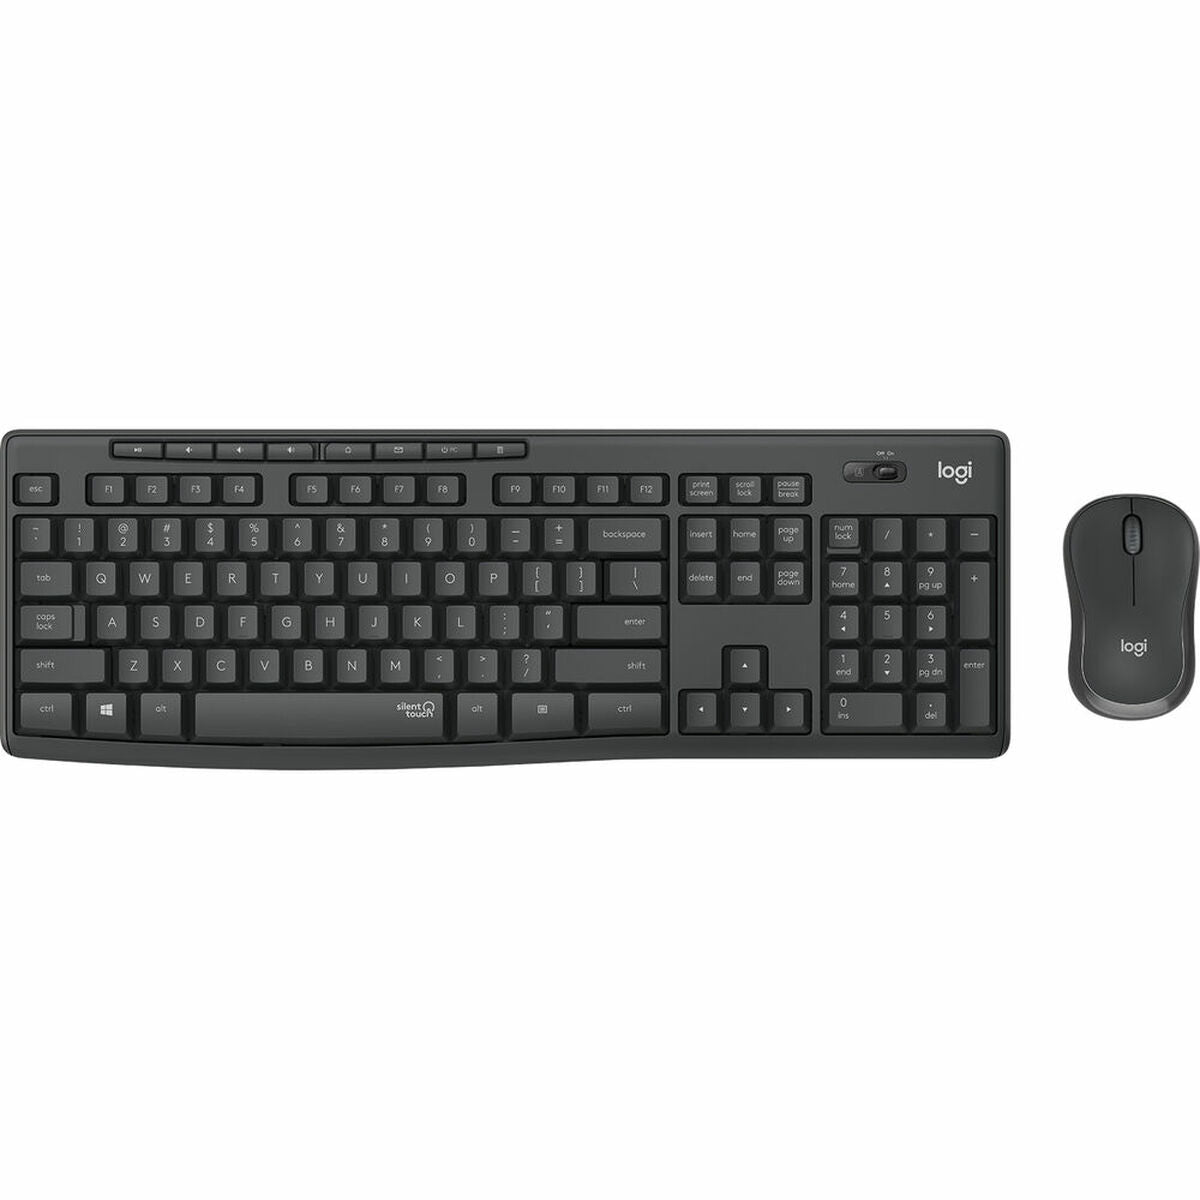 Keyboard and Wireless Mouse Logitech 920-009798 Black Spanish Qwerty QWERTY, Logitech, Computing, Accessories, keyboard-and-wireless-mouse-logitech-920-009798-black-spanish-qwerty-qwerty, Brand_Logitech, category-reference-2609, category-reference-2642, category-reference-2646, category-reference-t-19685, category-reference-t-19908, category-reference-t-21353, category-reference-t-25625, computers / peripherals, Condition_NEW, office, Price_50 - 100, Teleworking, RiotNook